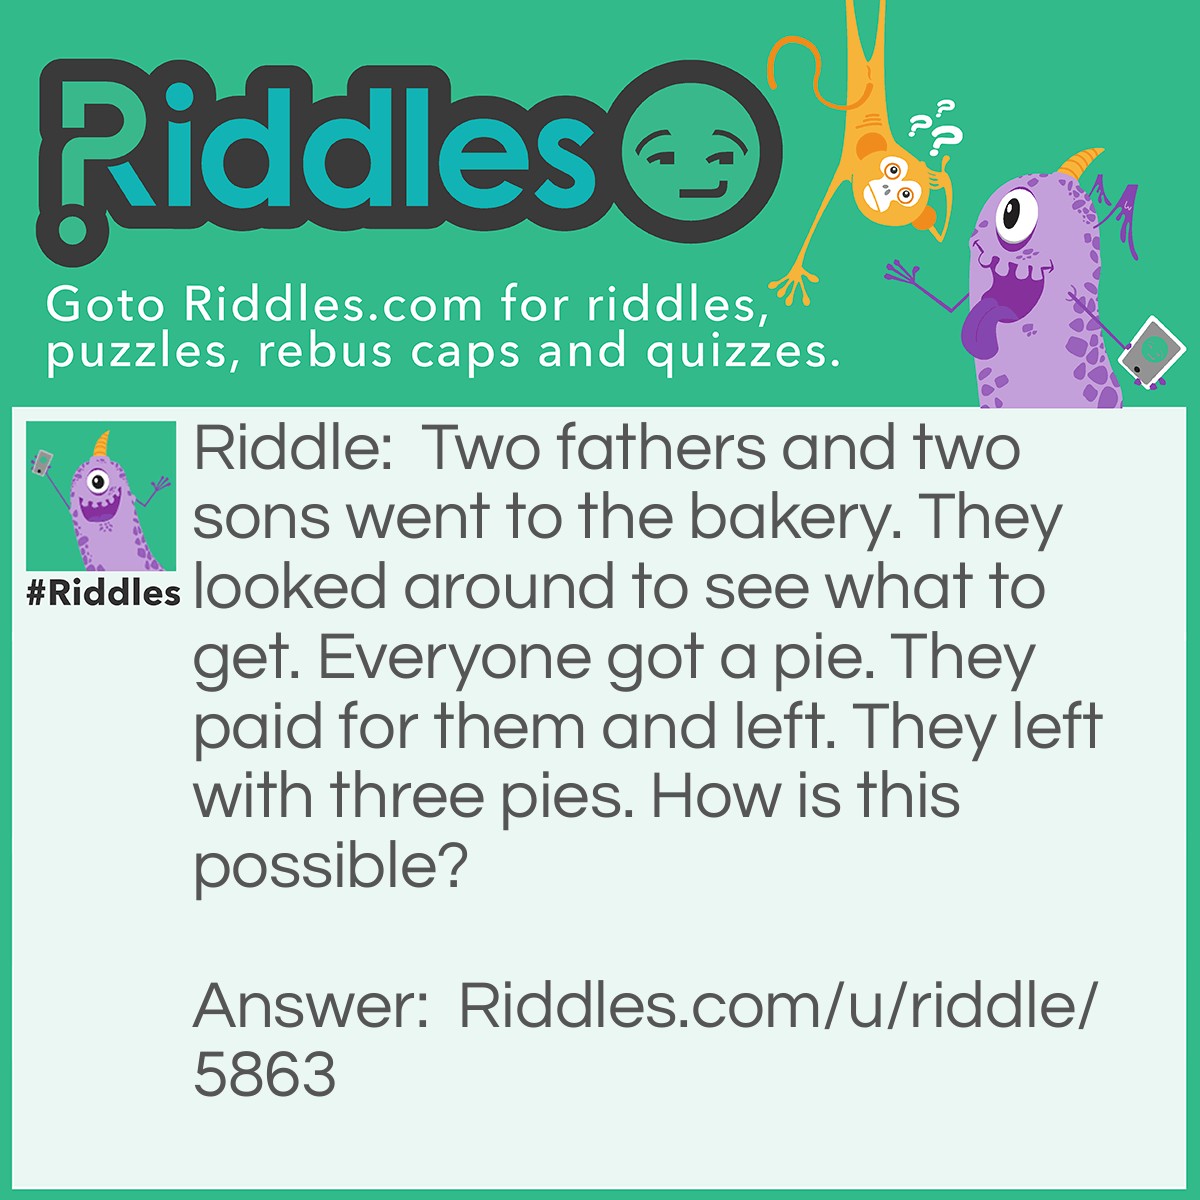 Riddle: Two fathers and two sons went to the bakery. They looked around to see what to get. Everyone got a pie. They paid for them and left. They left with three pies. How is this possible? Answer: One of the men is a grandfather (father to other father) One is a father and one is a boy. (both sons and one father)